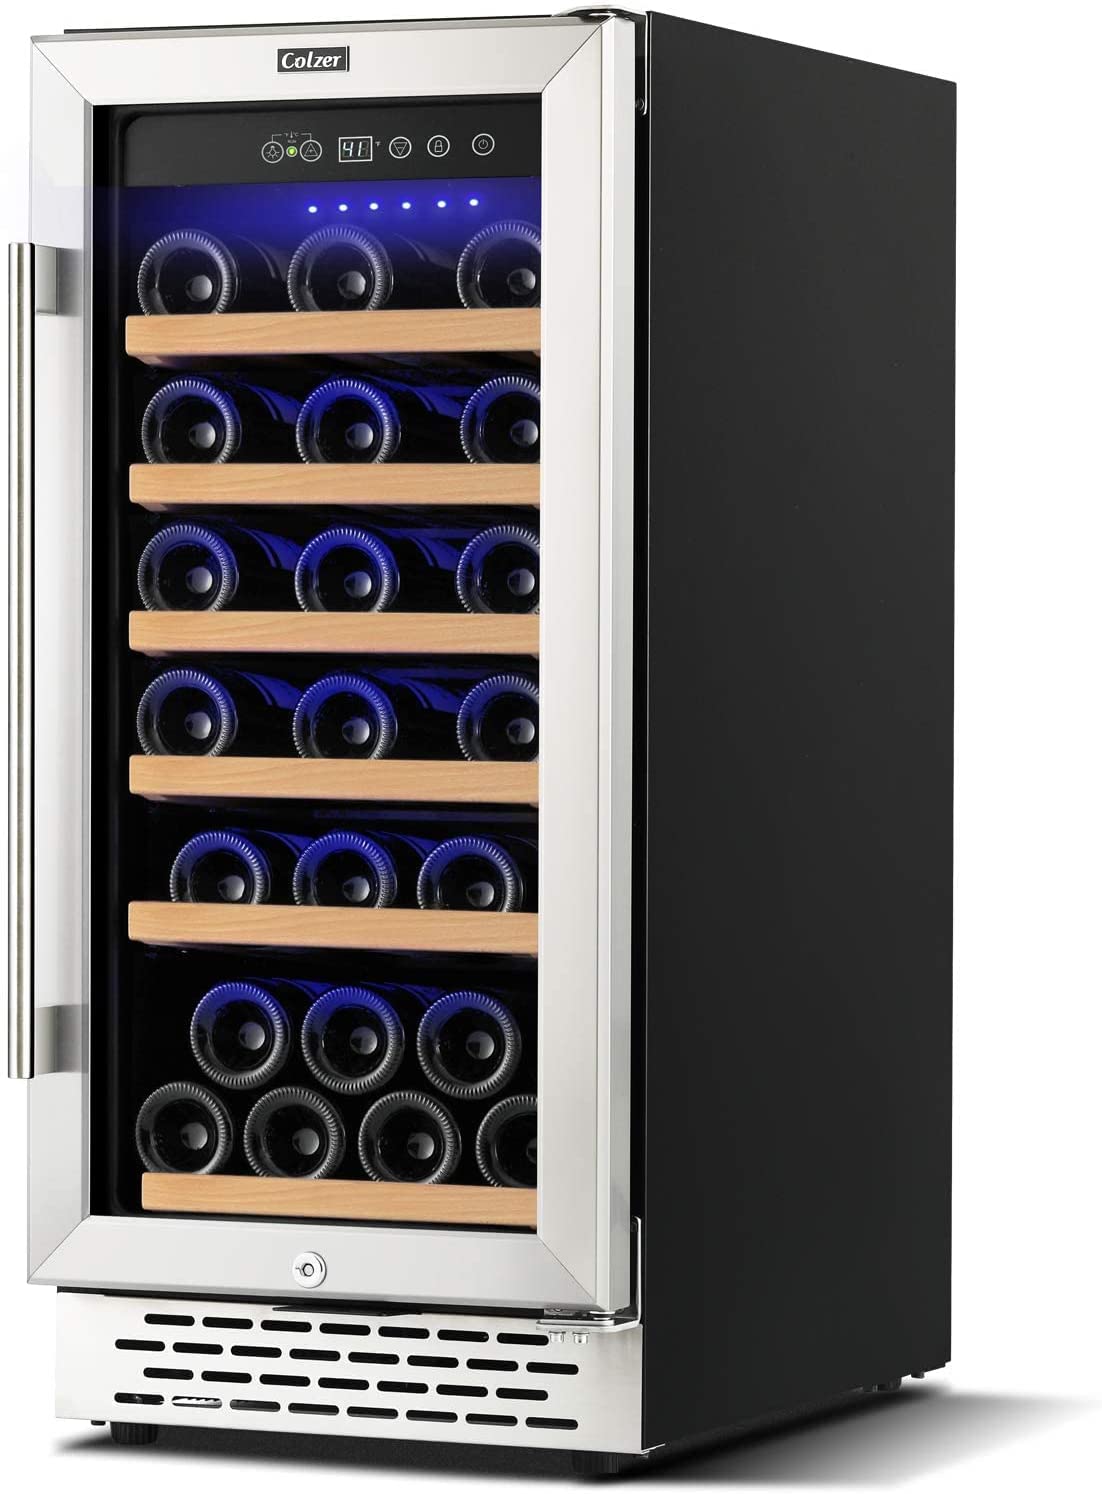 An image showcasing the differences between a wine fridge and a wine cooler, helping you make an informed decision when choosing between wine fridge vs wine cooler.